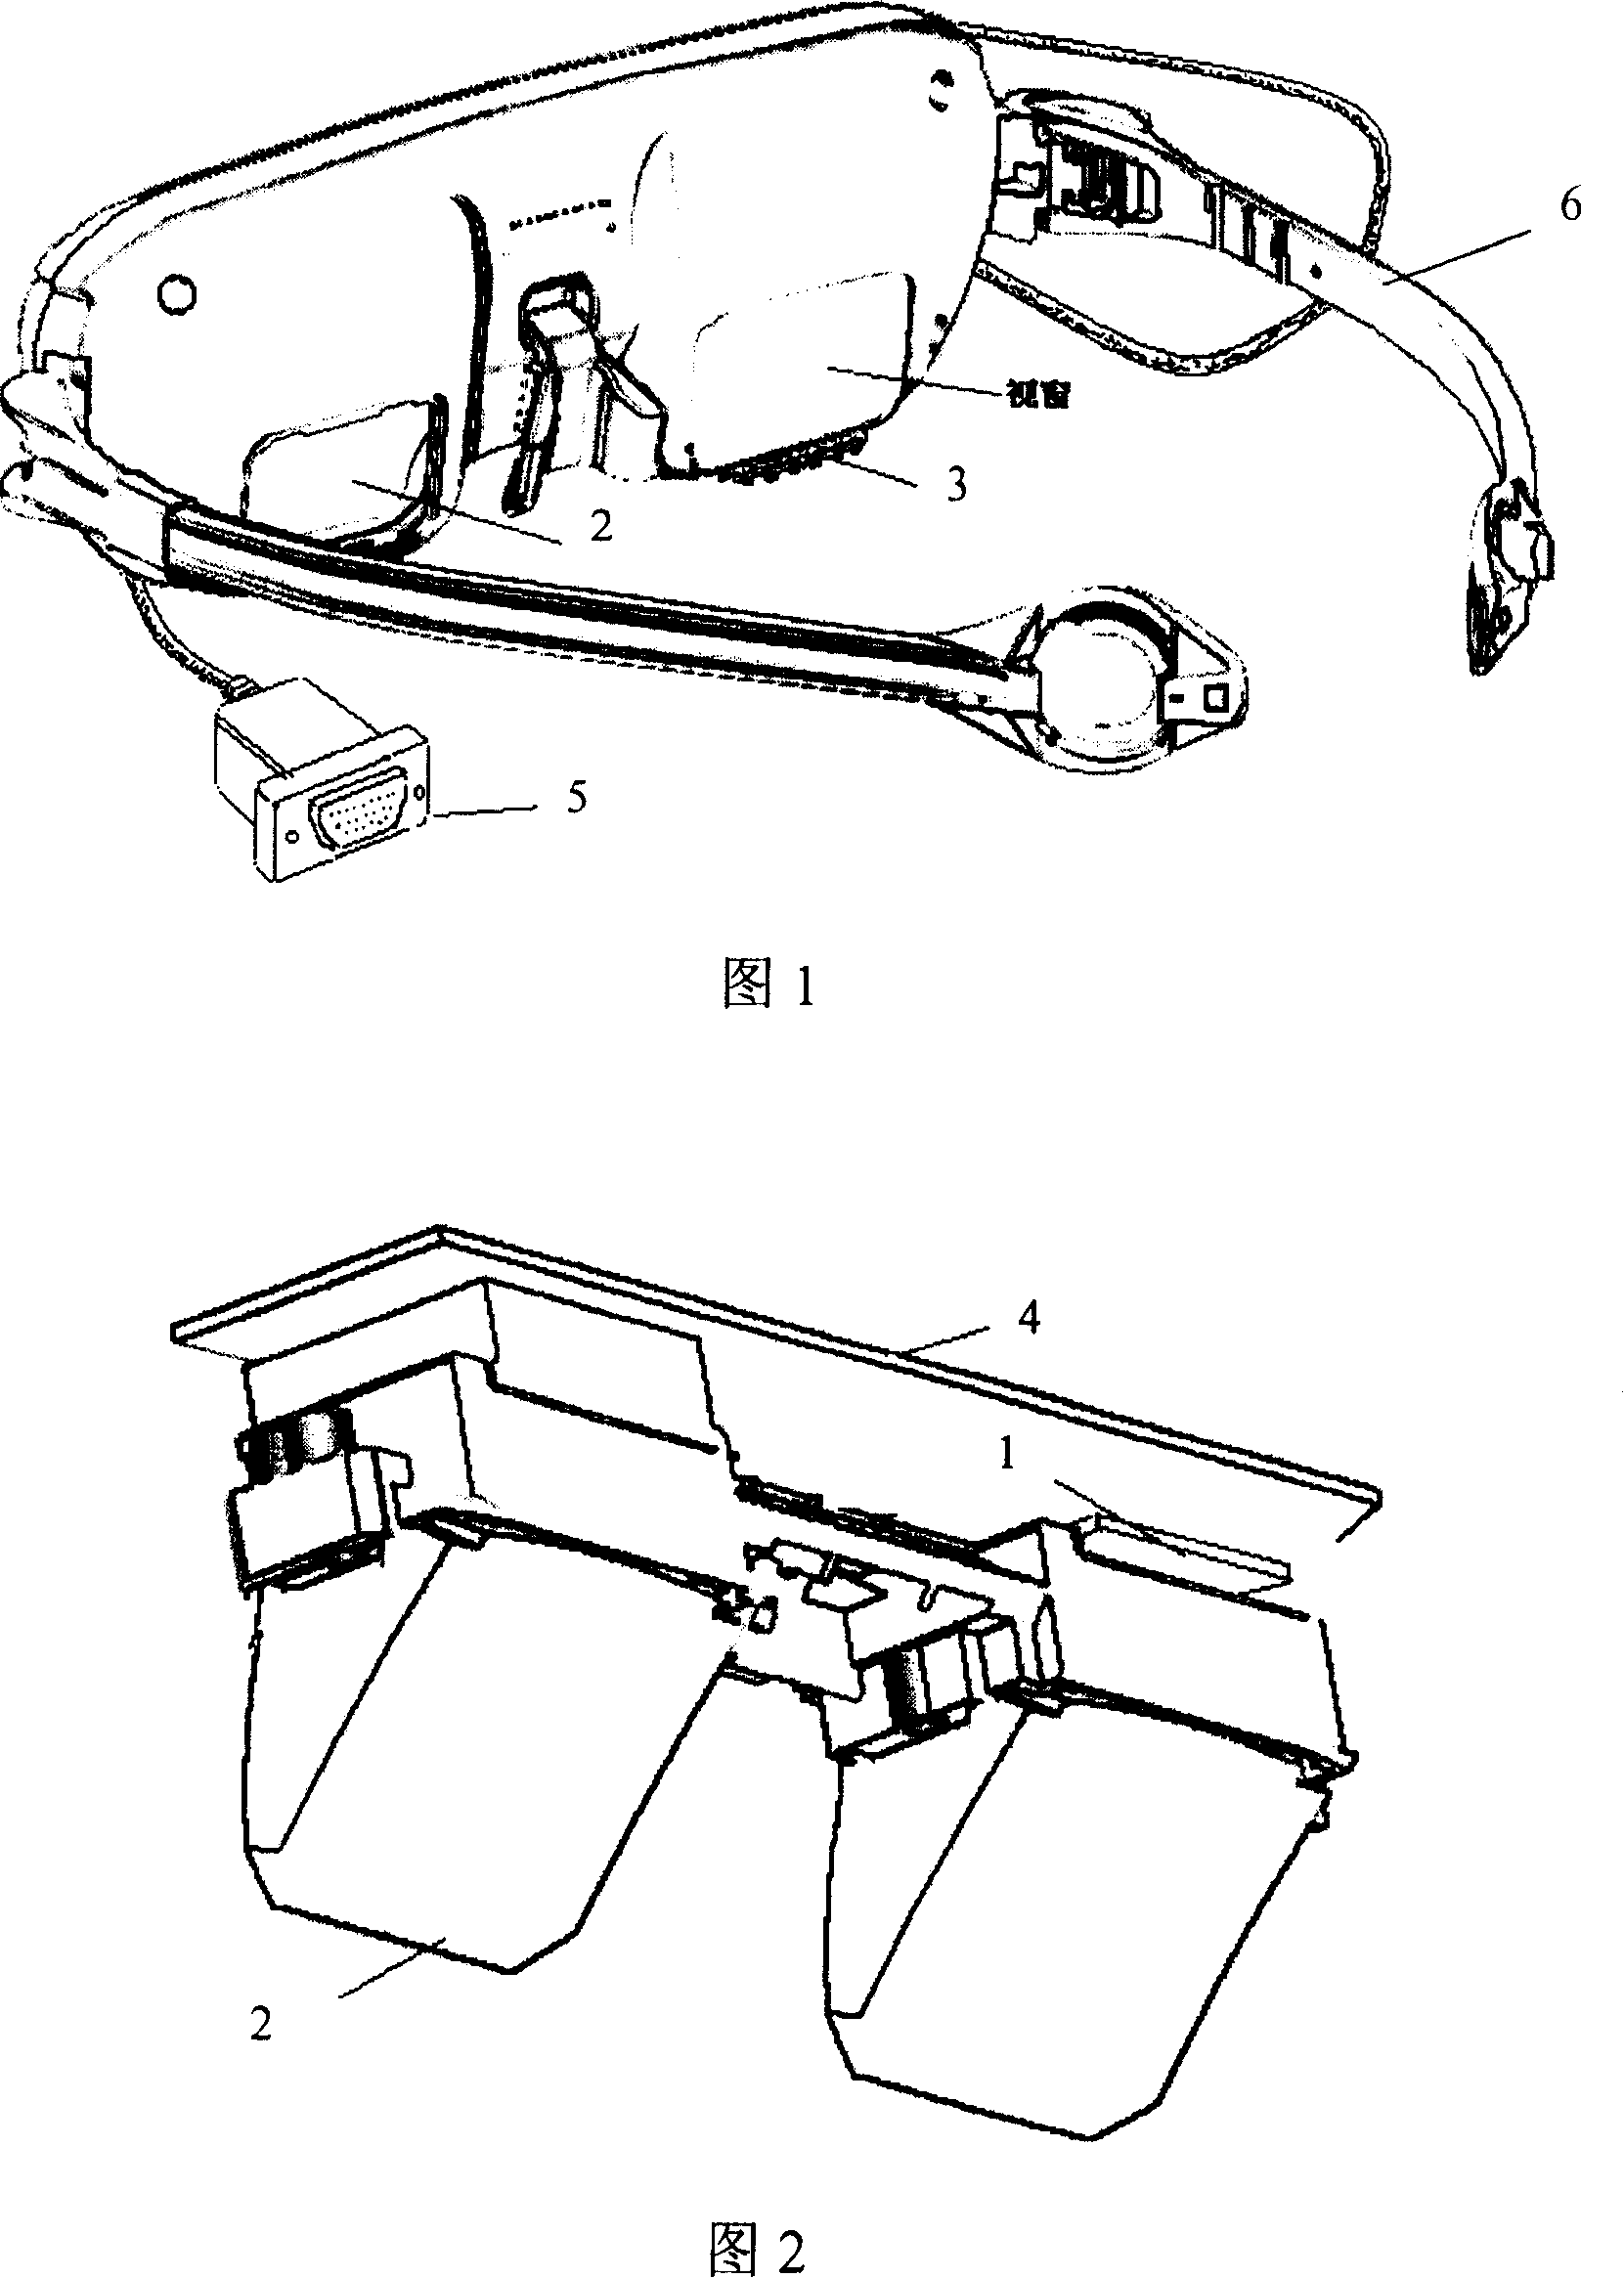 Spectacle type display device